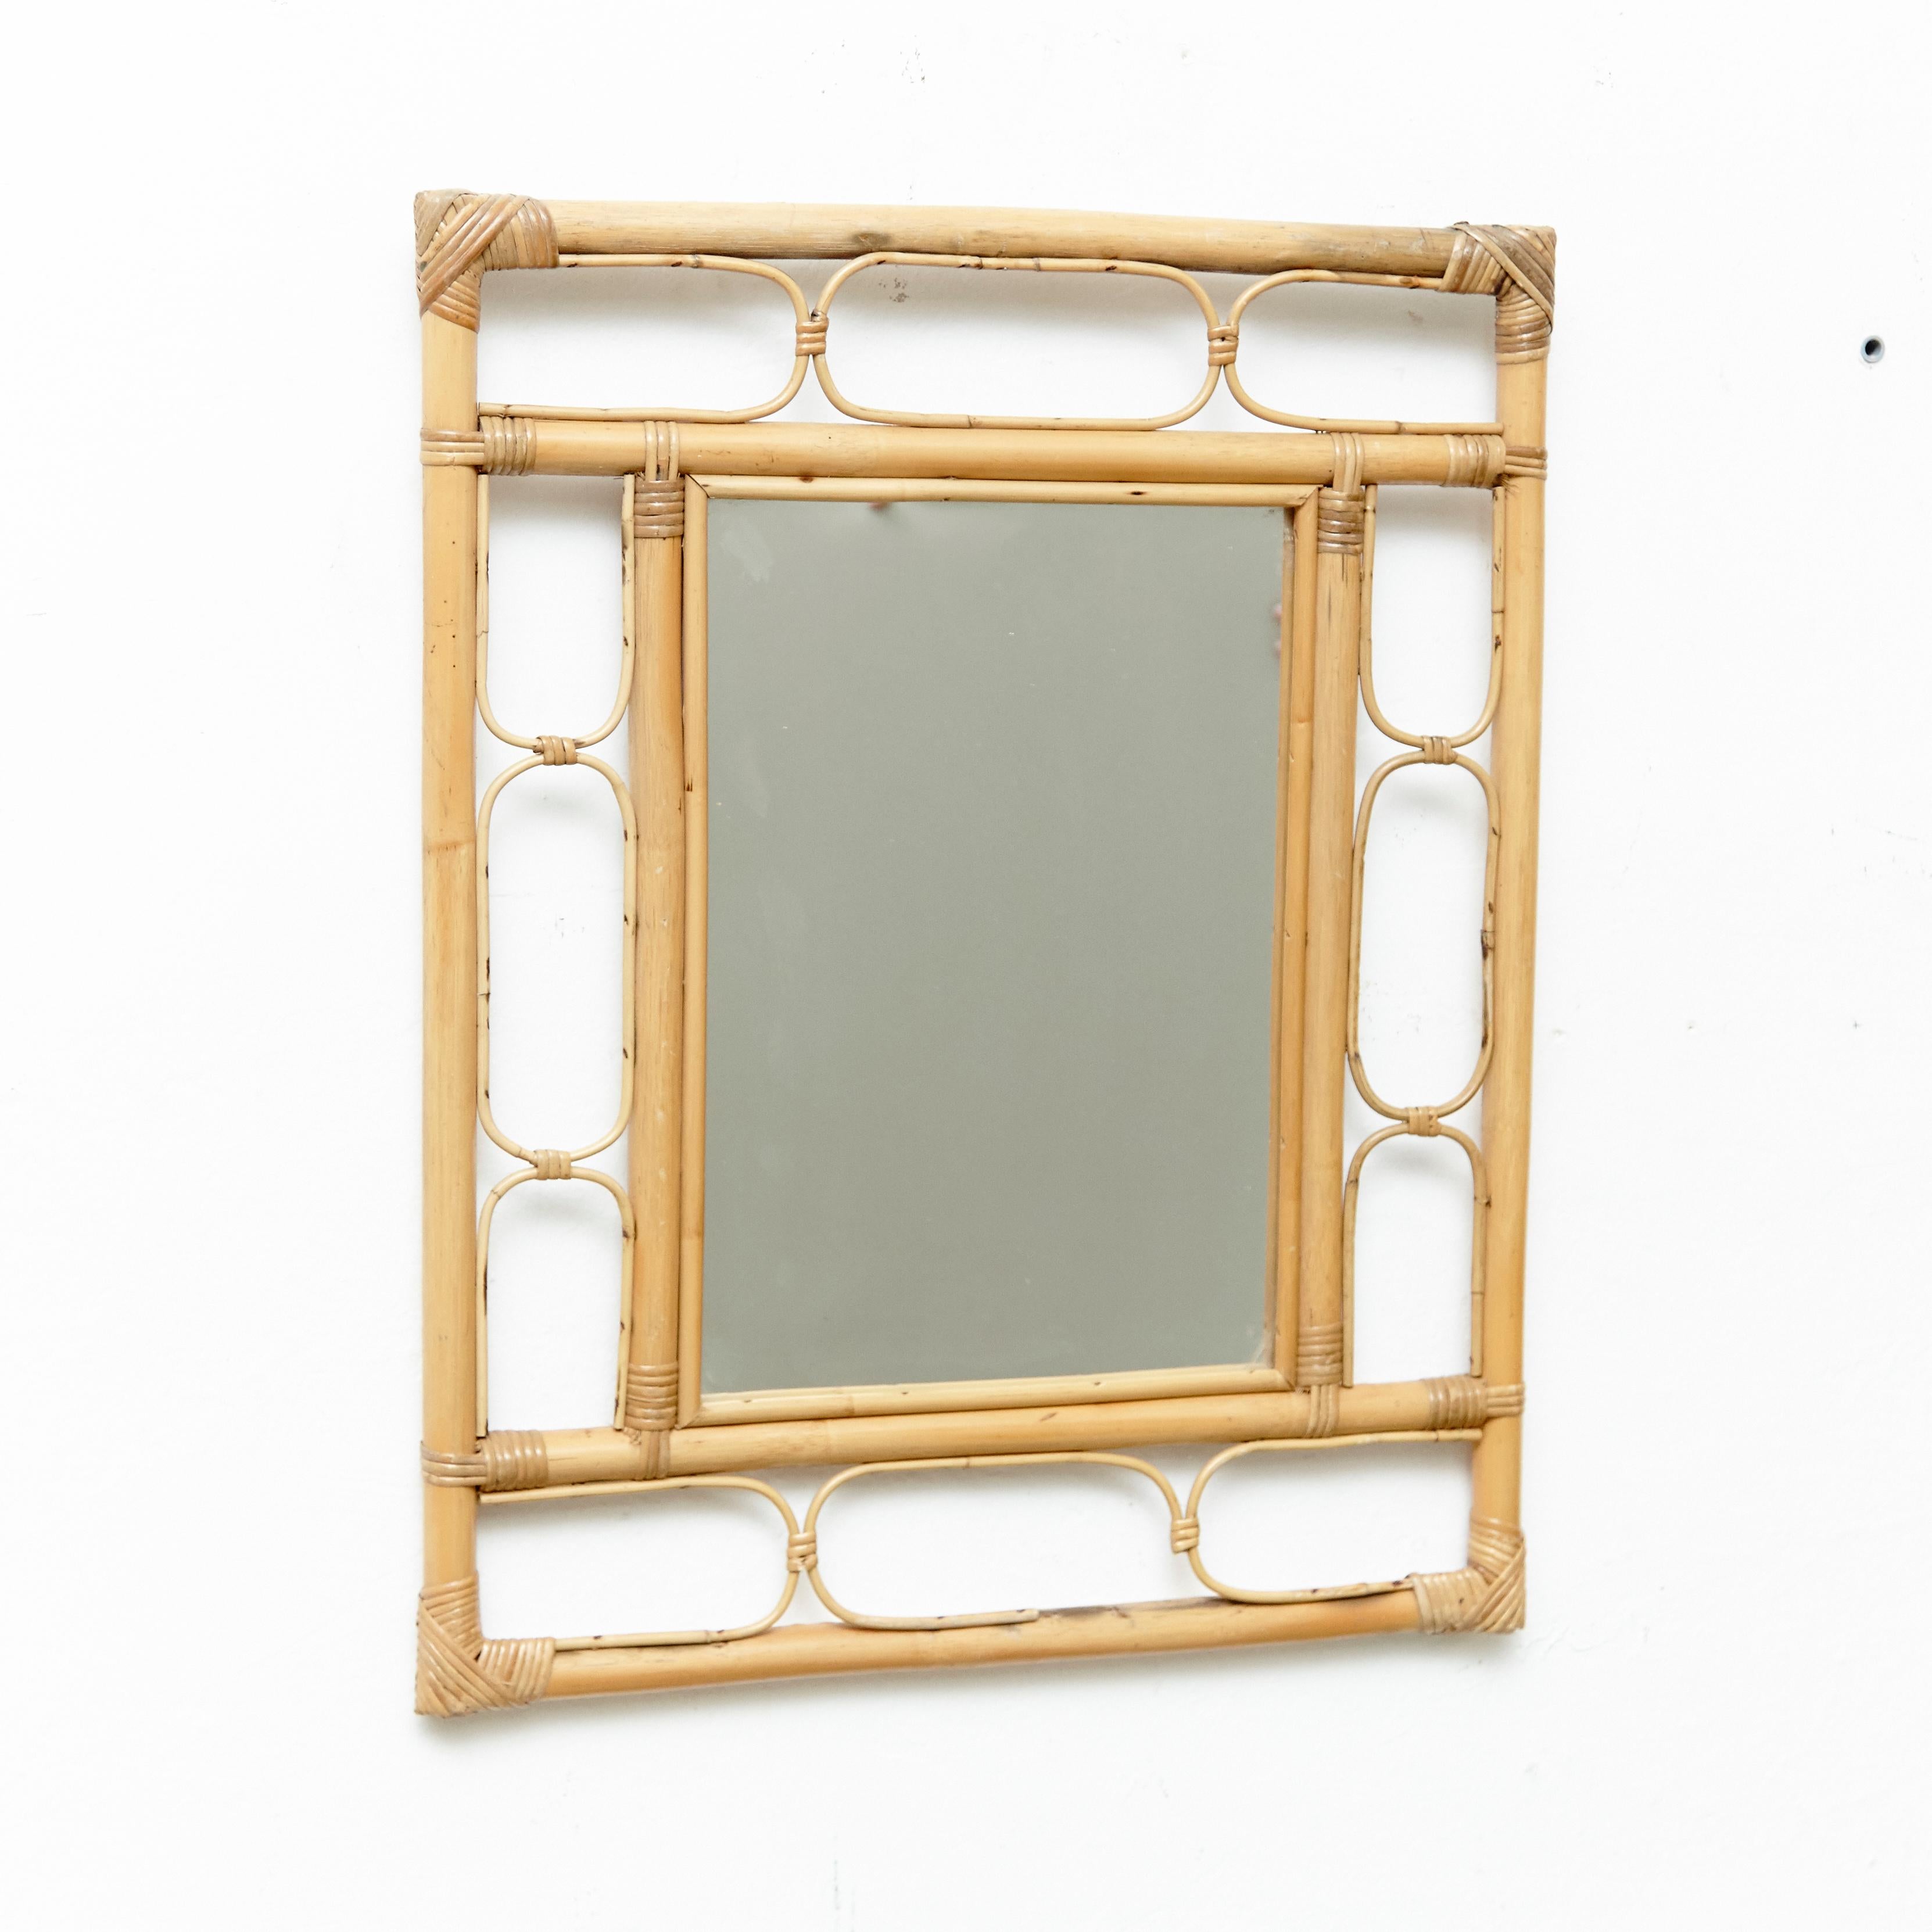 Mid-Century Modern mirror bamboo and rattan handcrafted, circa 1960
Traditionally manufactured in French.
By unknown designer.

In original condition with minor wear consistent of age and use, preserving a beautiful patina.